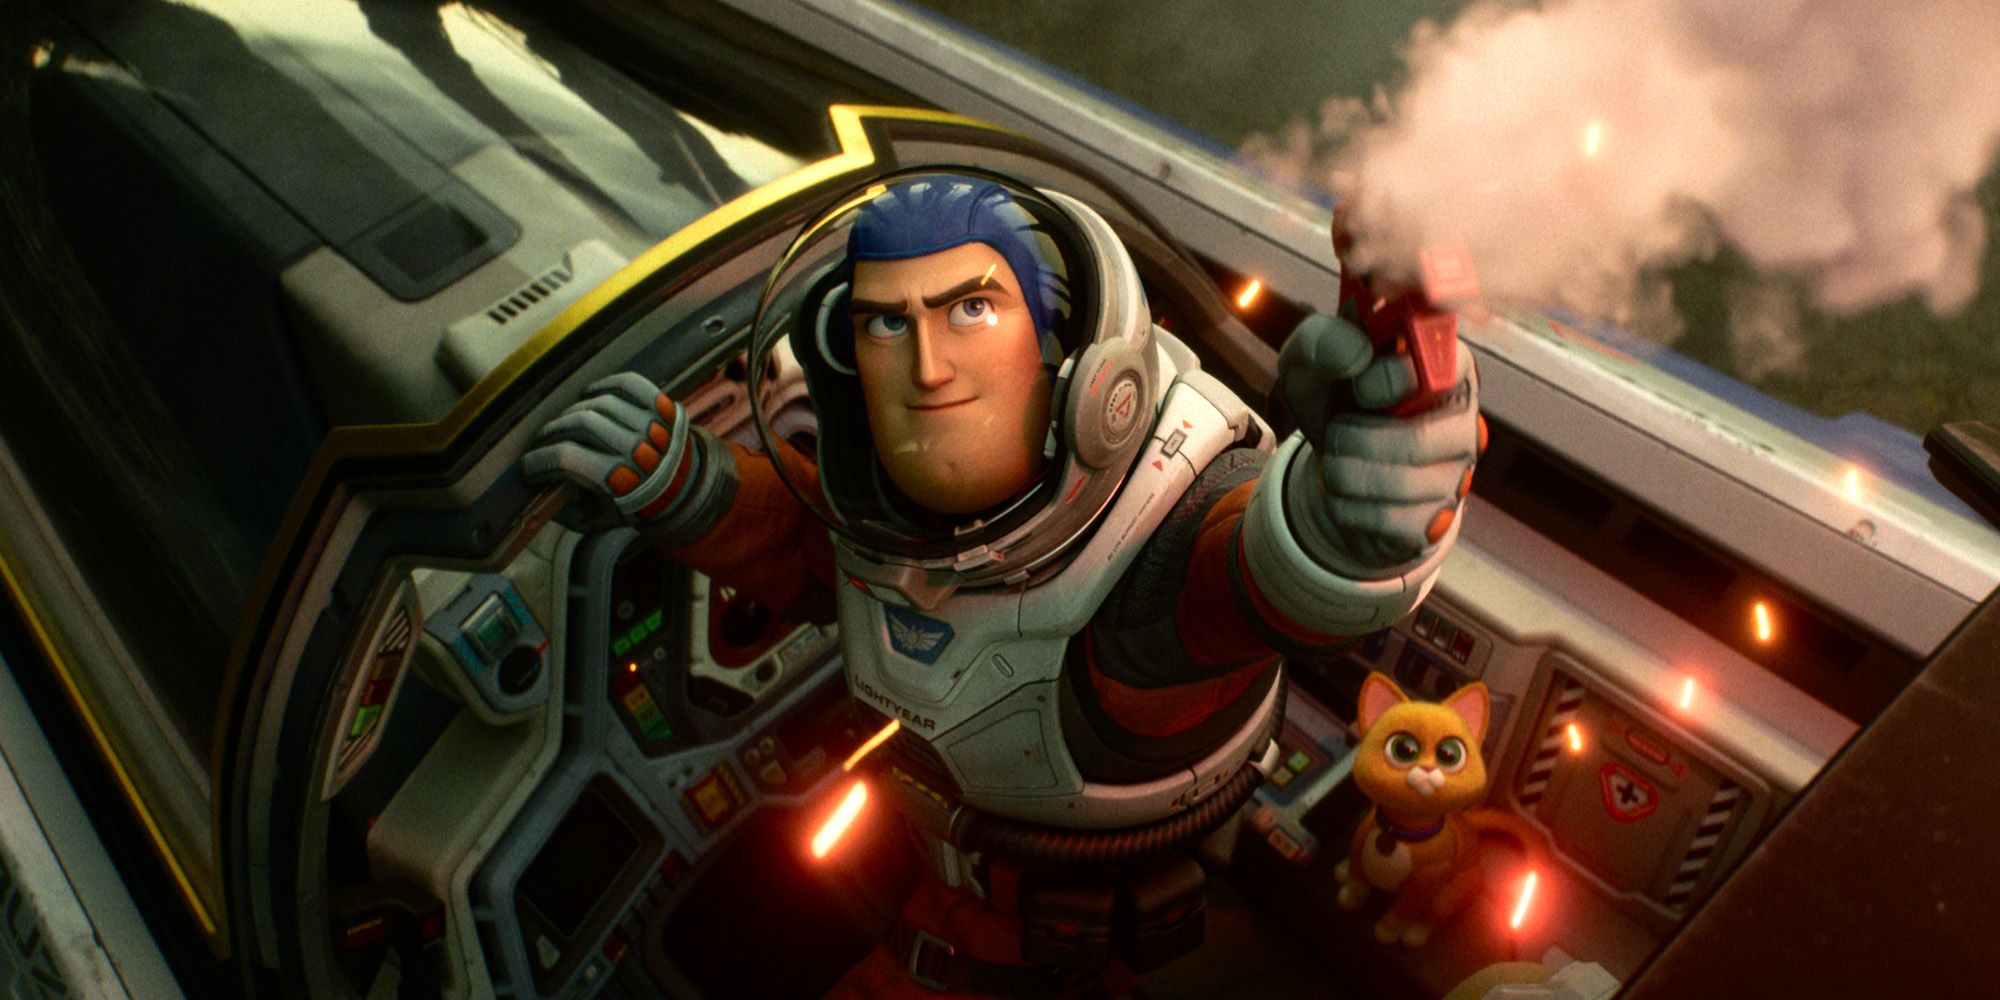 Lightyear: Every Toy Story Movie Ranked According to Letterboxd